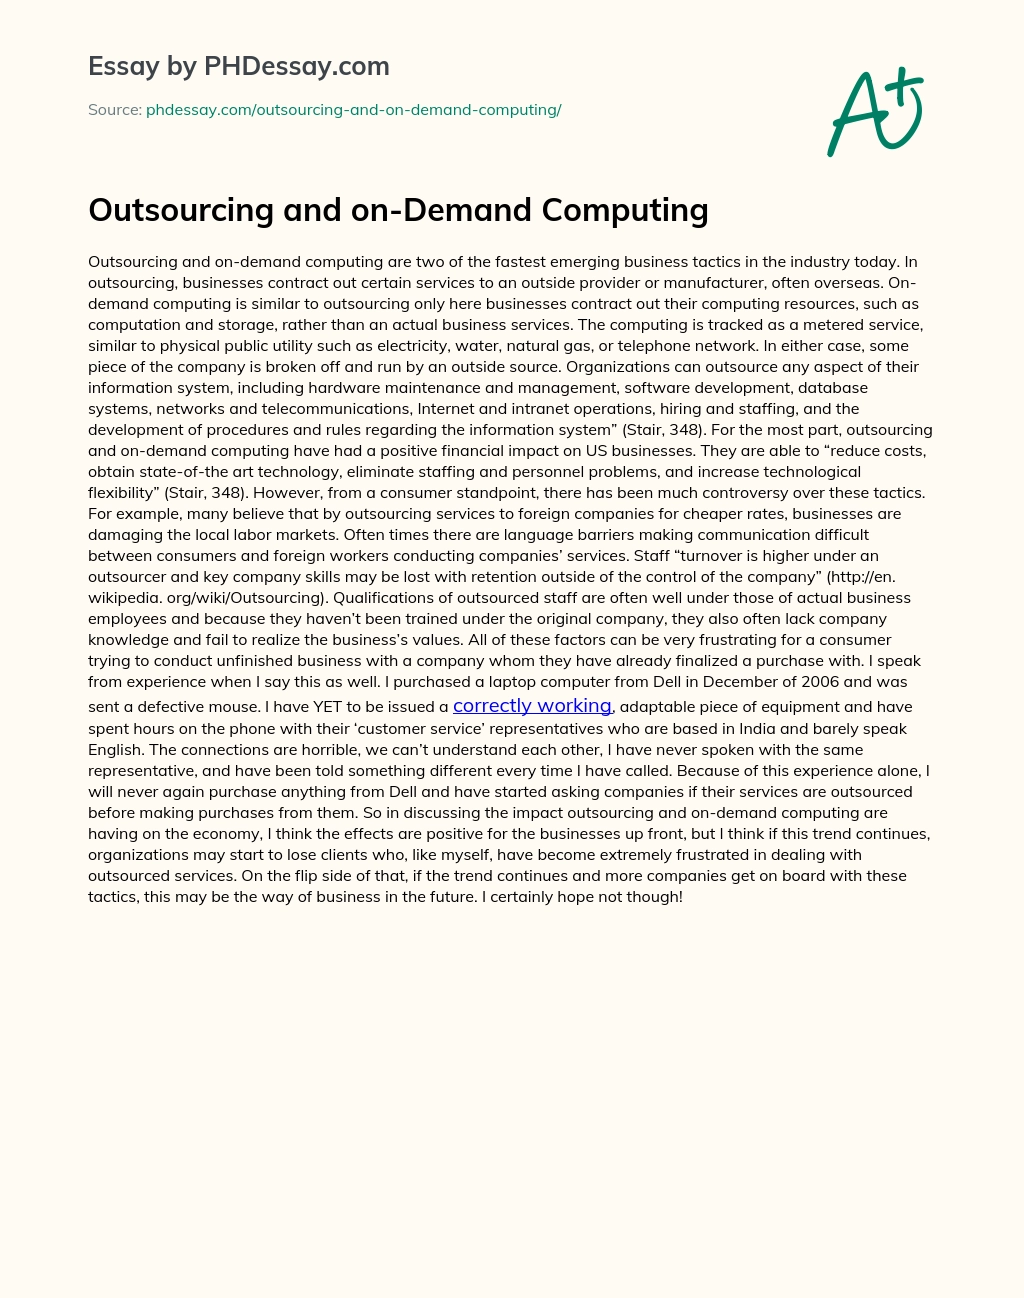 Outsourcing and on-Demand Computing essay